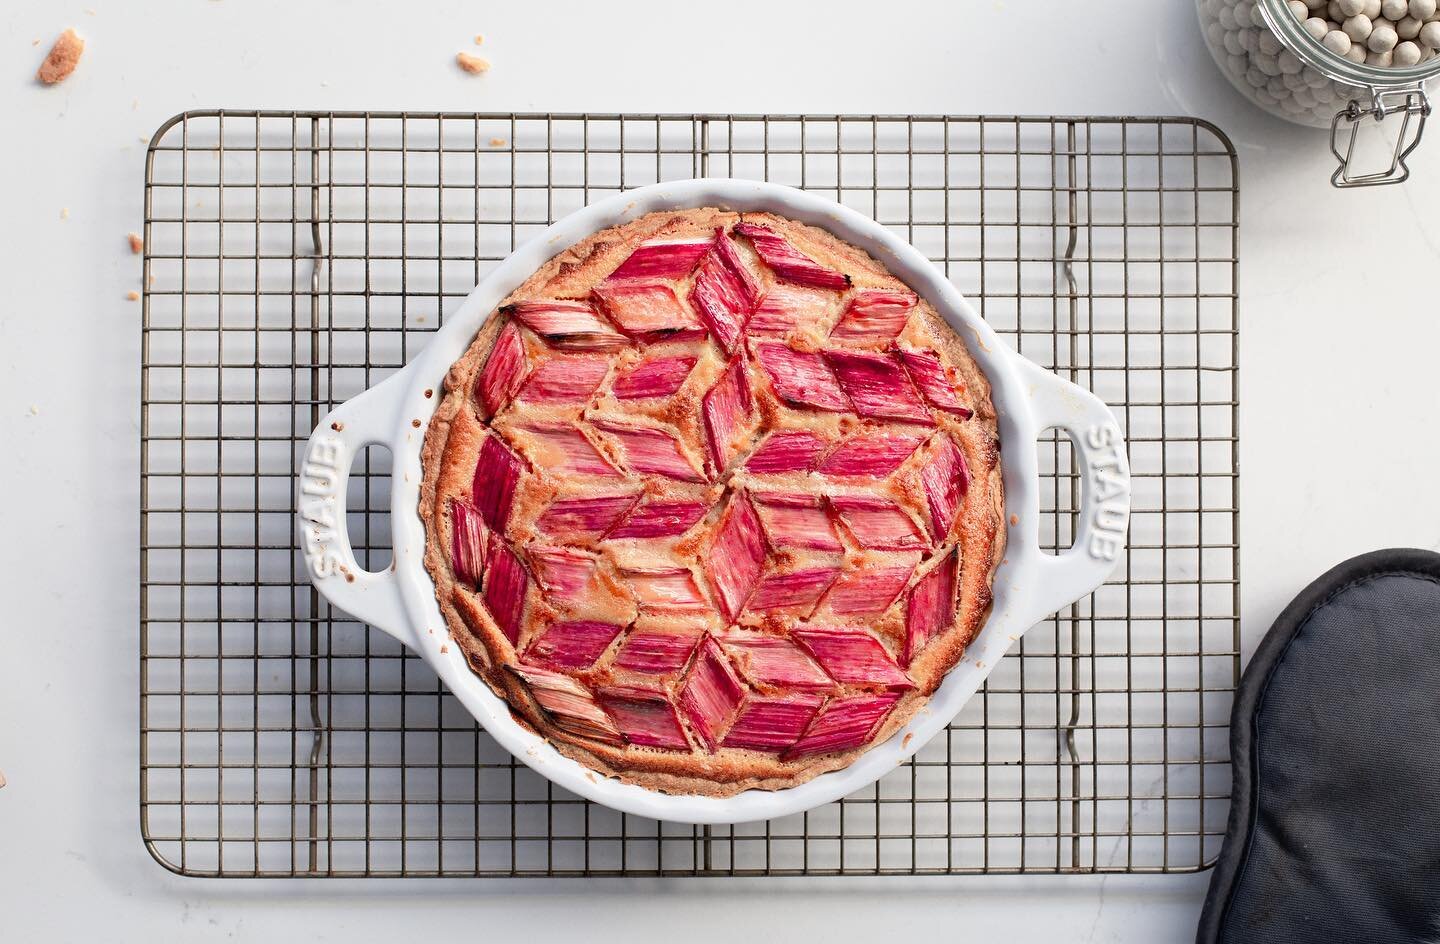 Because sometimes, all it takes is a pretty pie to make you smile. 

#rhubarb #rhubarbandcustard #pie #geometric #notperfect #bakingprettythings #bakingfromscratch #imadethis #petitesweetbakehouse #tartealsacienne #sweetthings #newyearbaking #staub